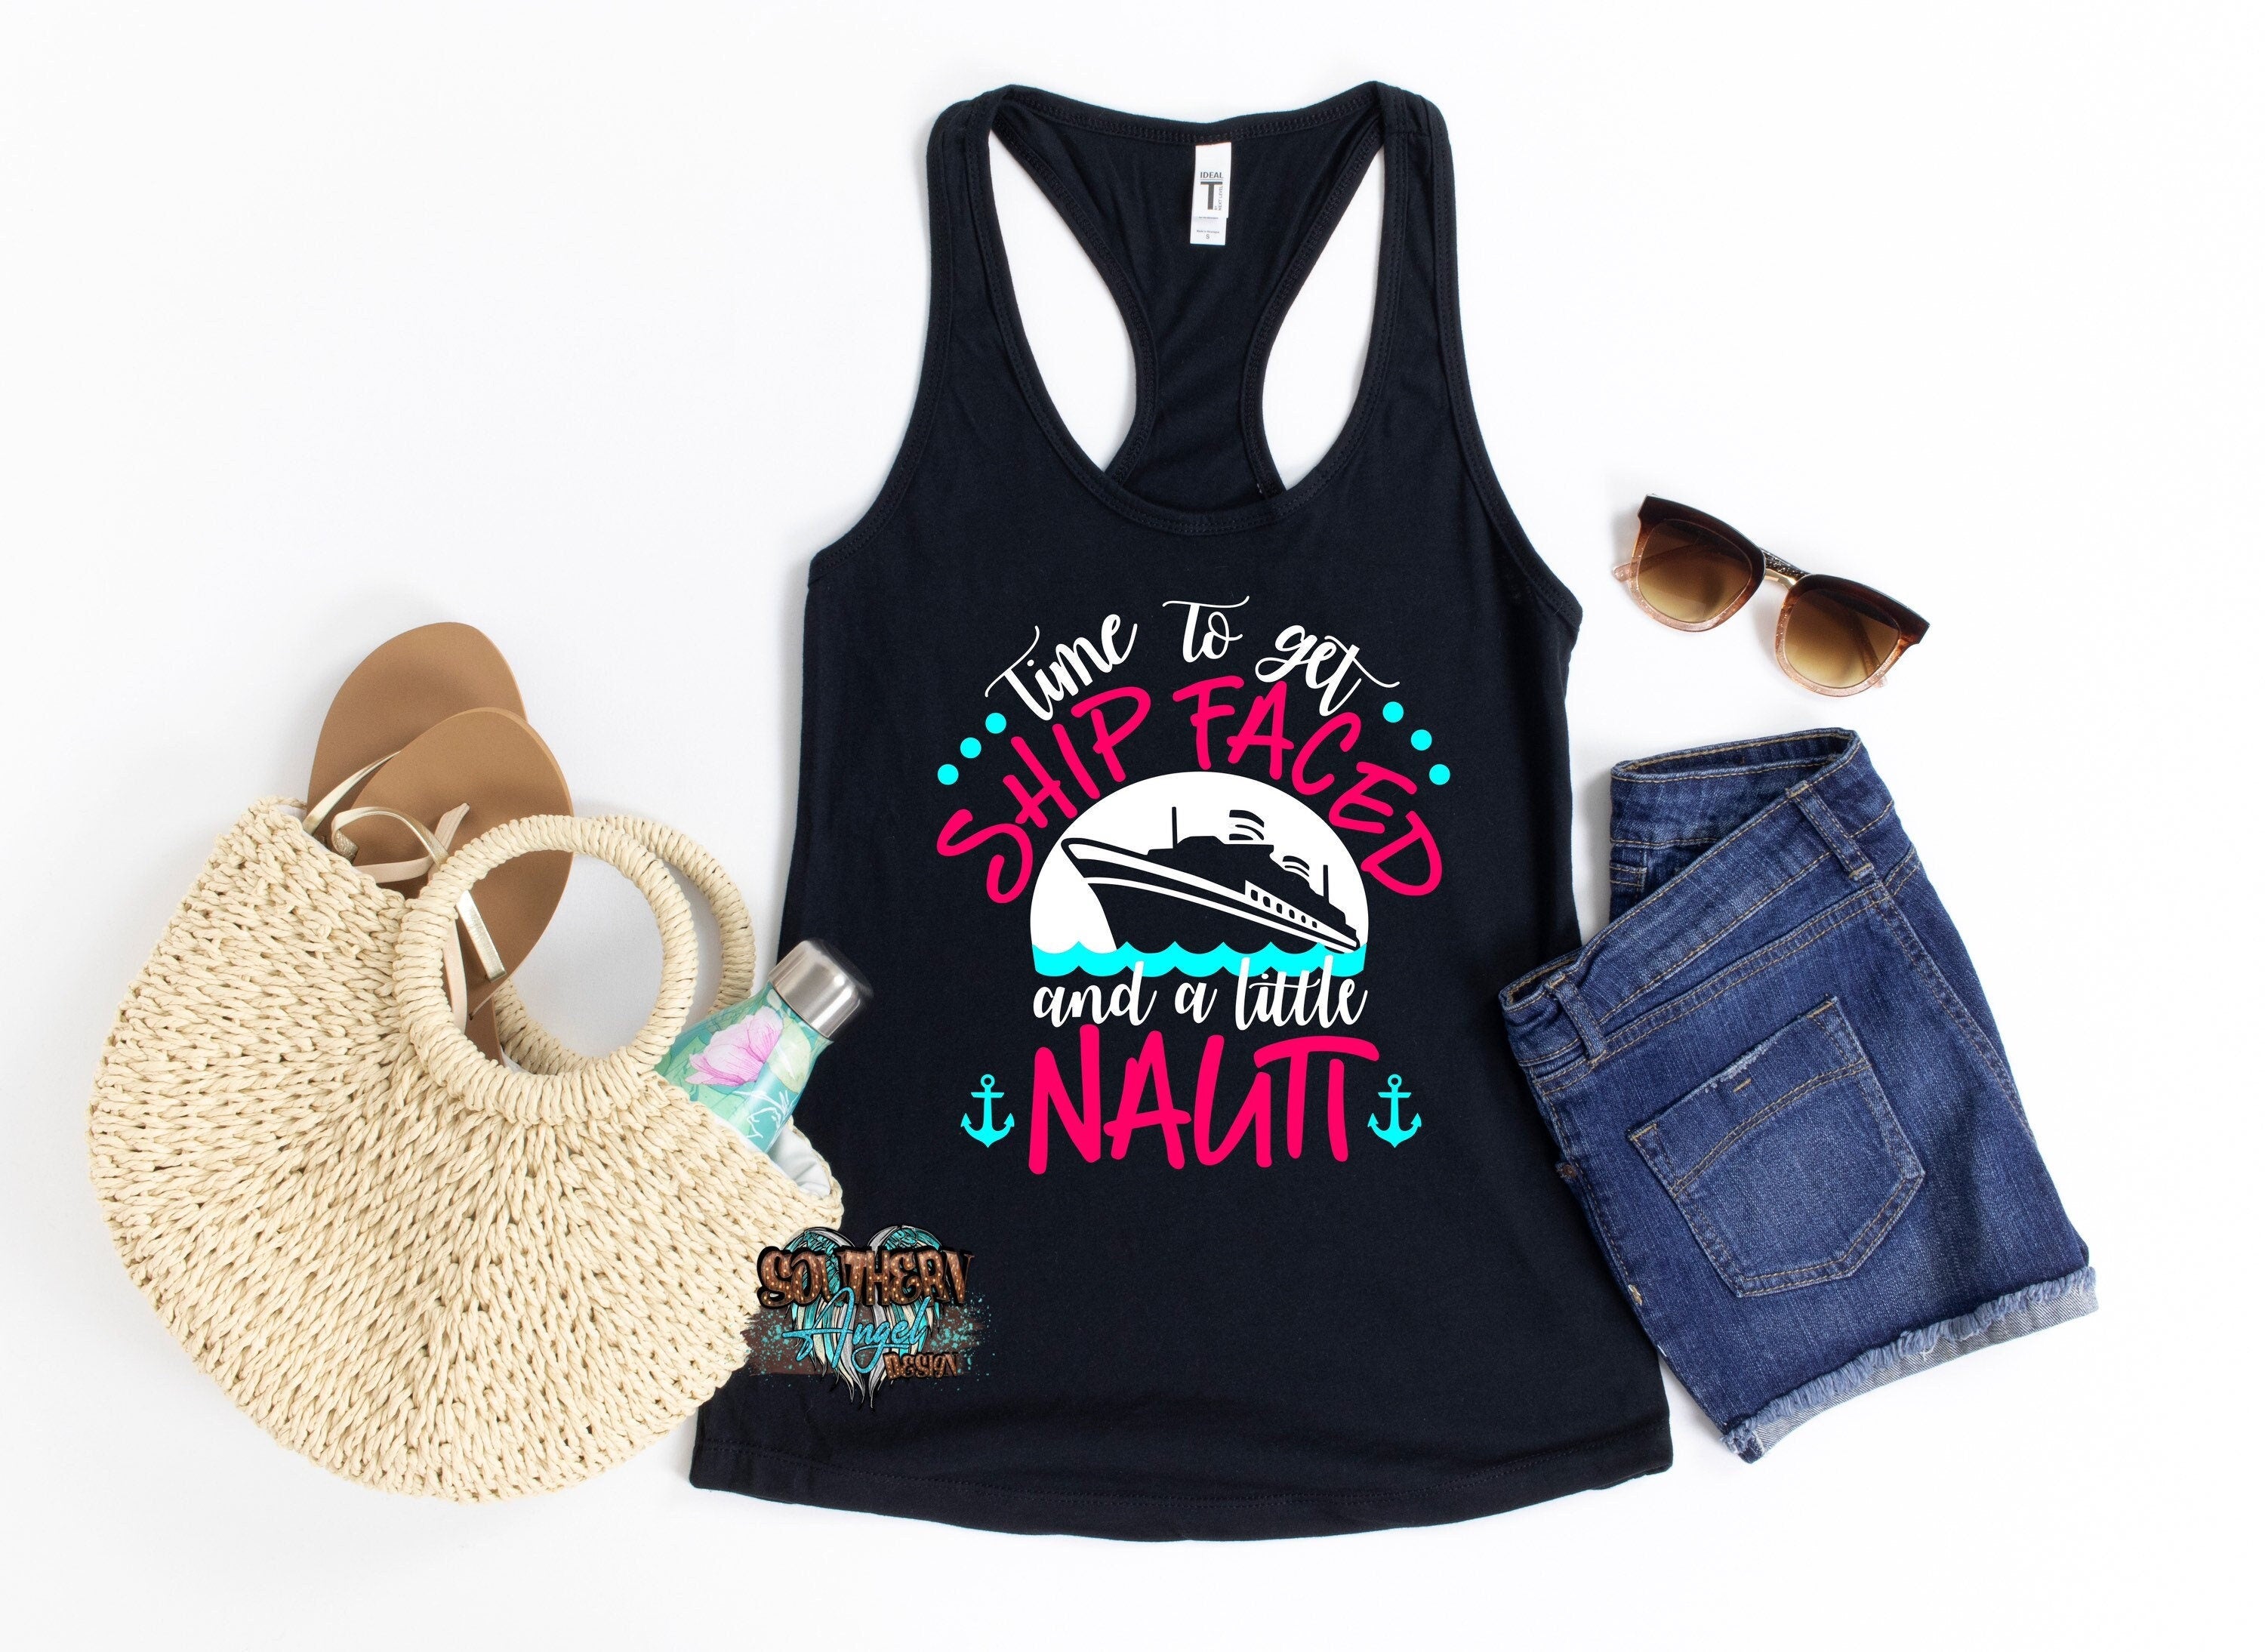 Time To Get Ship Faced And A Little Nauti tank | Summer tank | Cruise tank top | Vacation tank | Swimsuit coverup | Bachelorette shirt